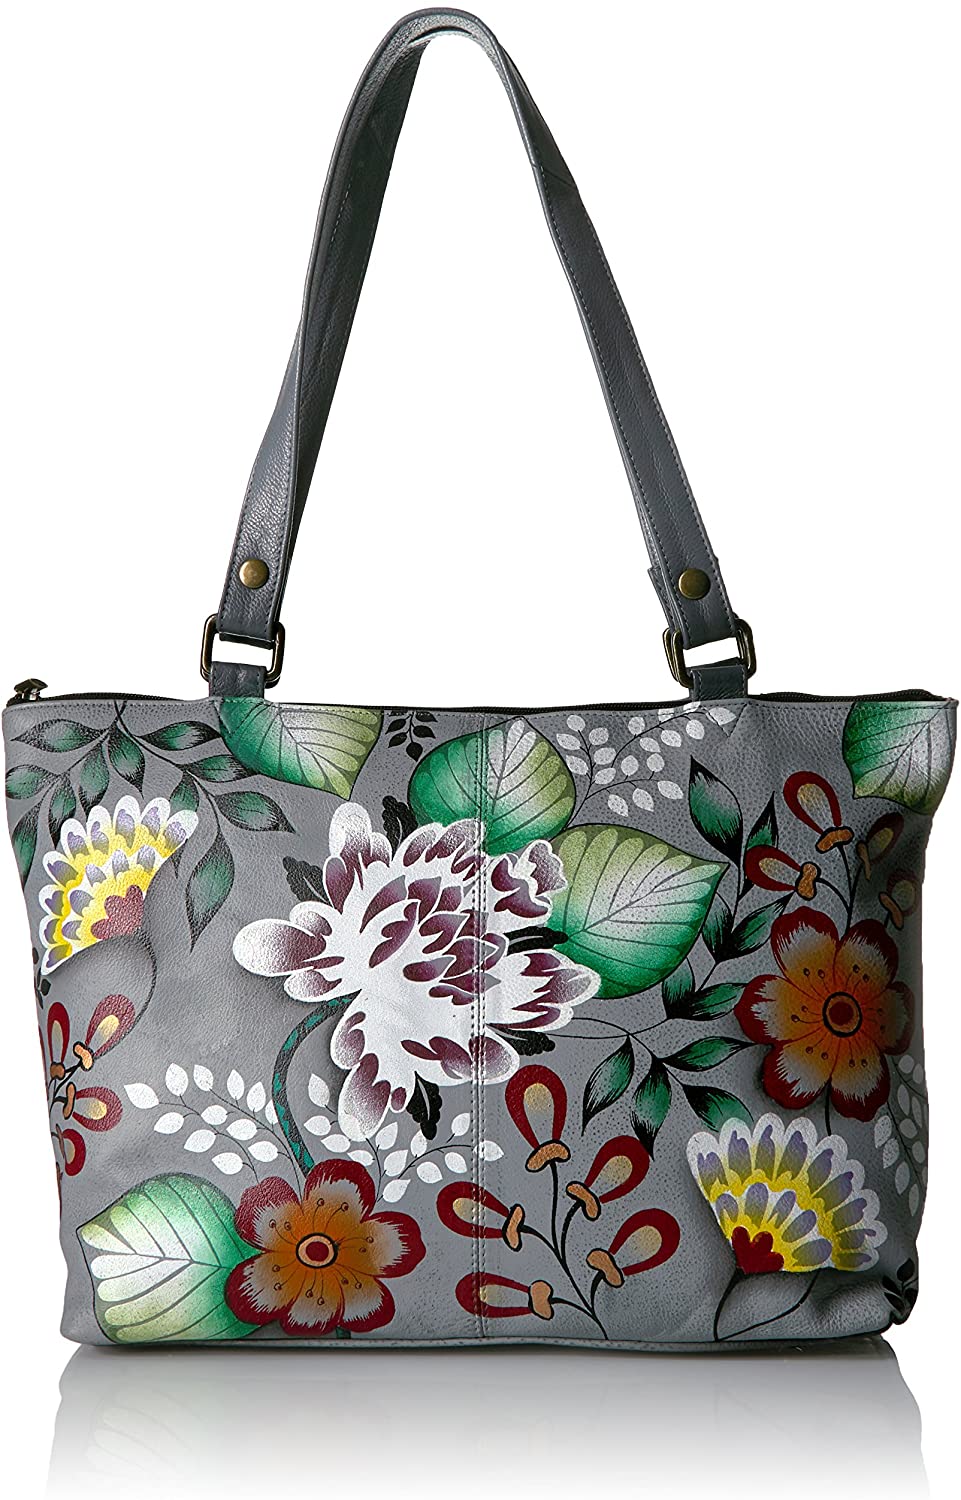 Price:$122.05    Anna by Anuschka Women's Genuine Leather Large Classic Tote | Hand Painted Original Artwork | Garden of Eden  Clothing